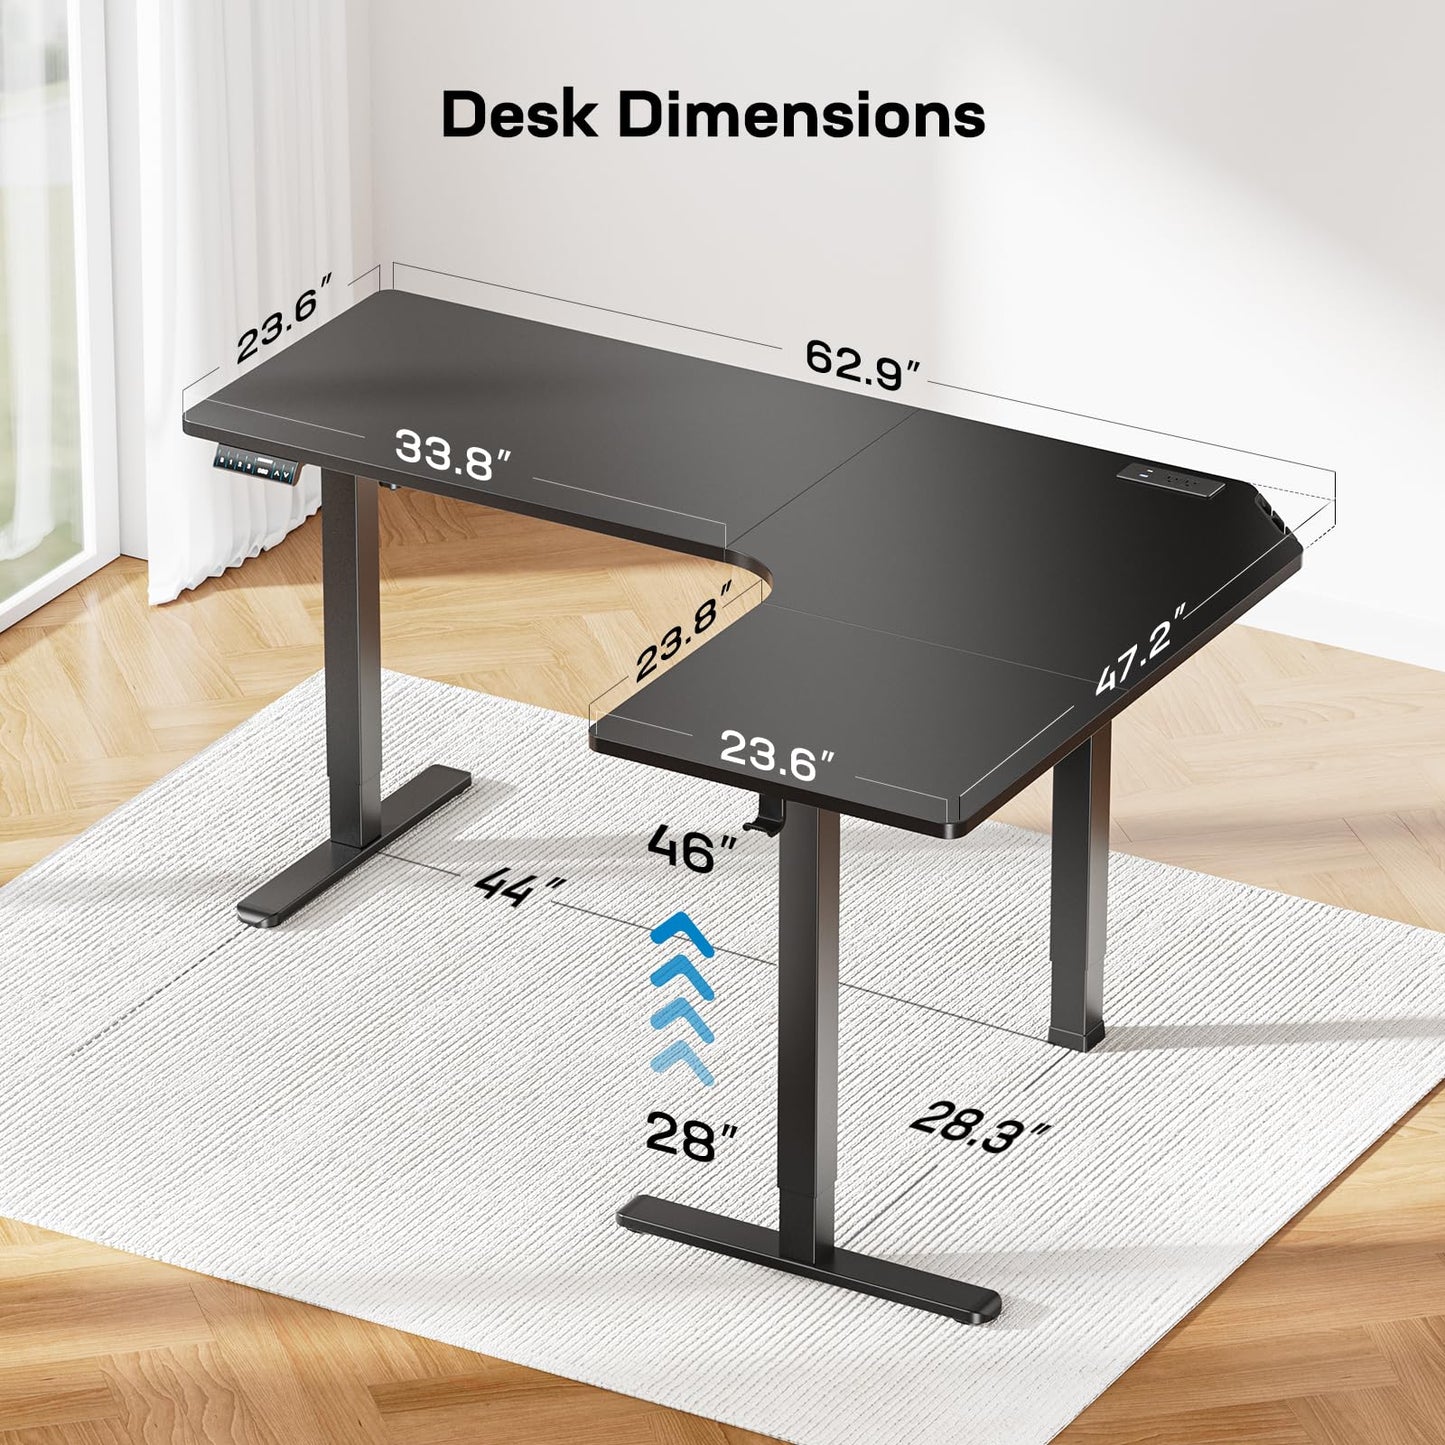 HUANUO 63″ Dual Motor L-Shaped Standing Desk, Built-in Power Outlets, Electric Height Adjustable Corner Computer Desk, Large Power Strip Holder, Sit Stand Up Desk with 3 Preset Heights, Black